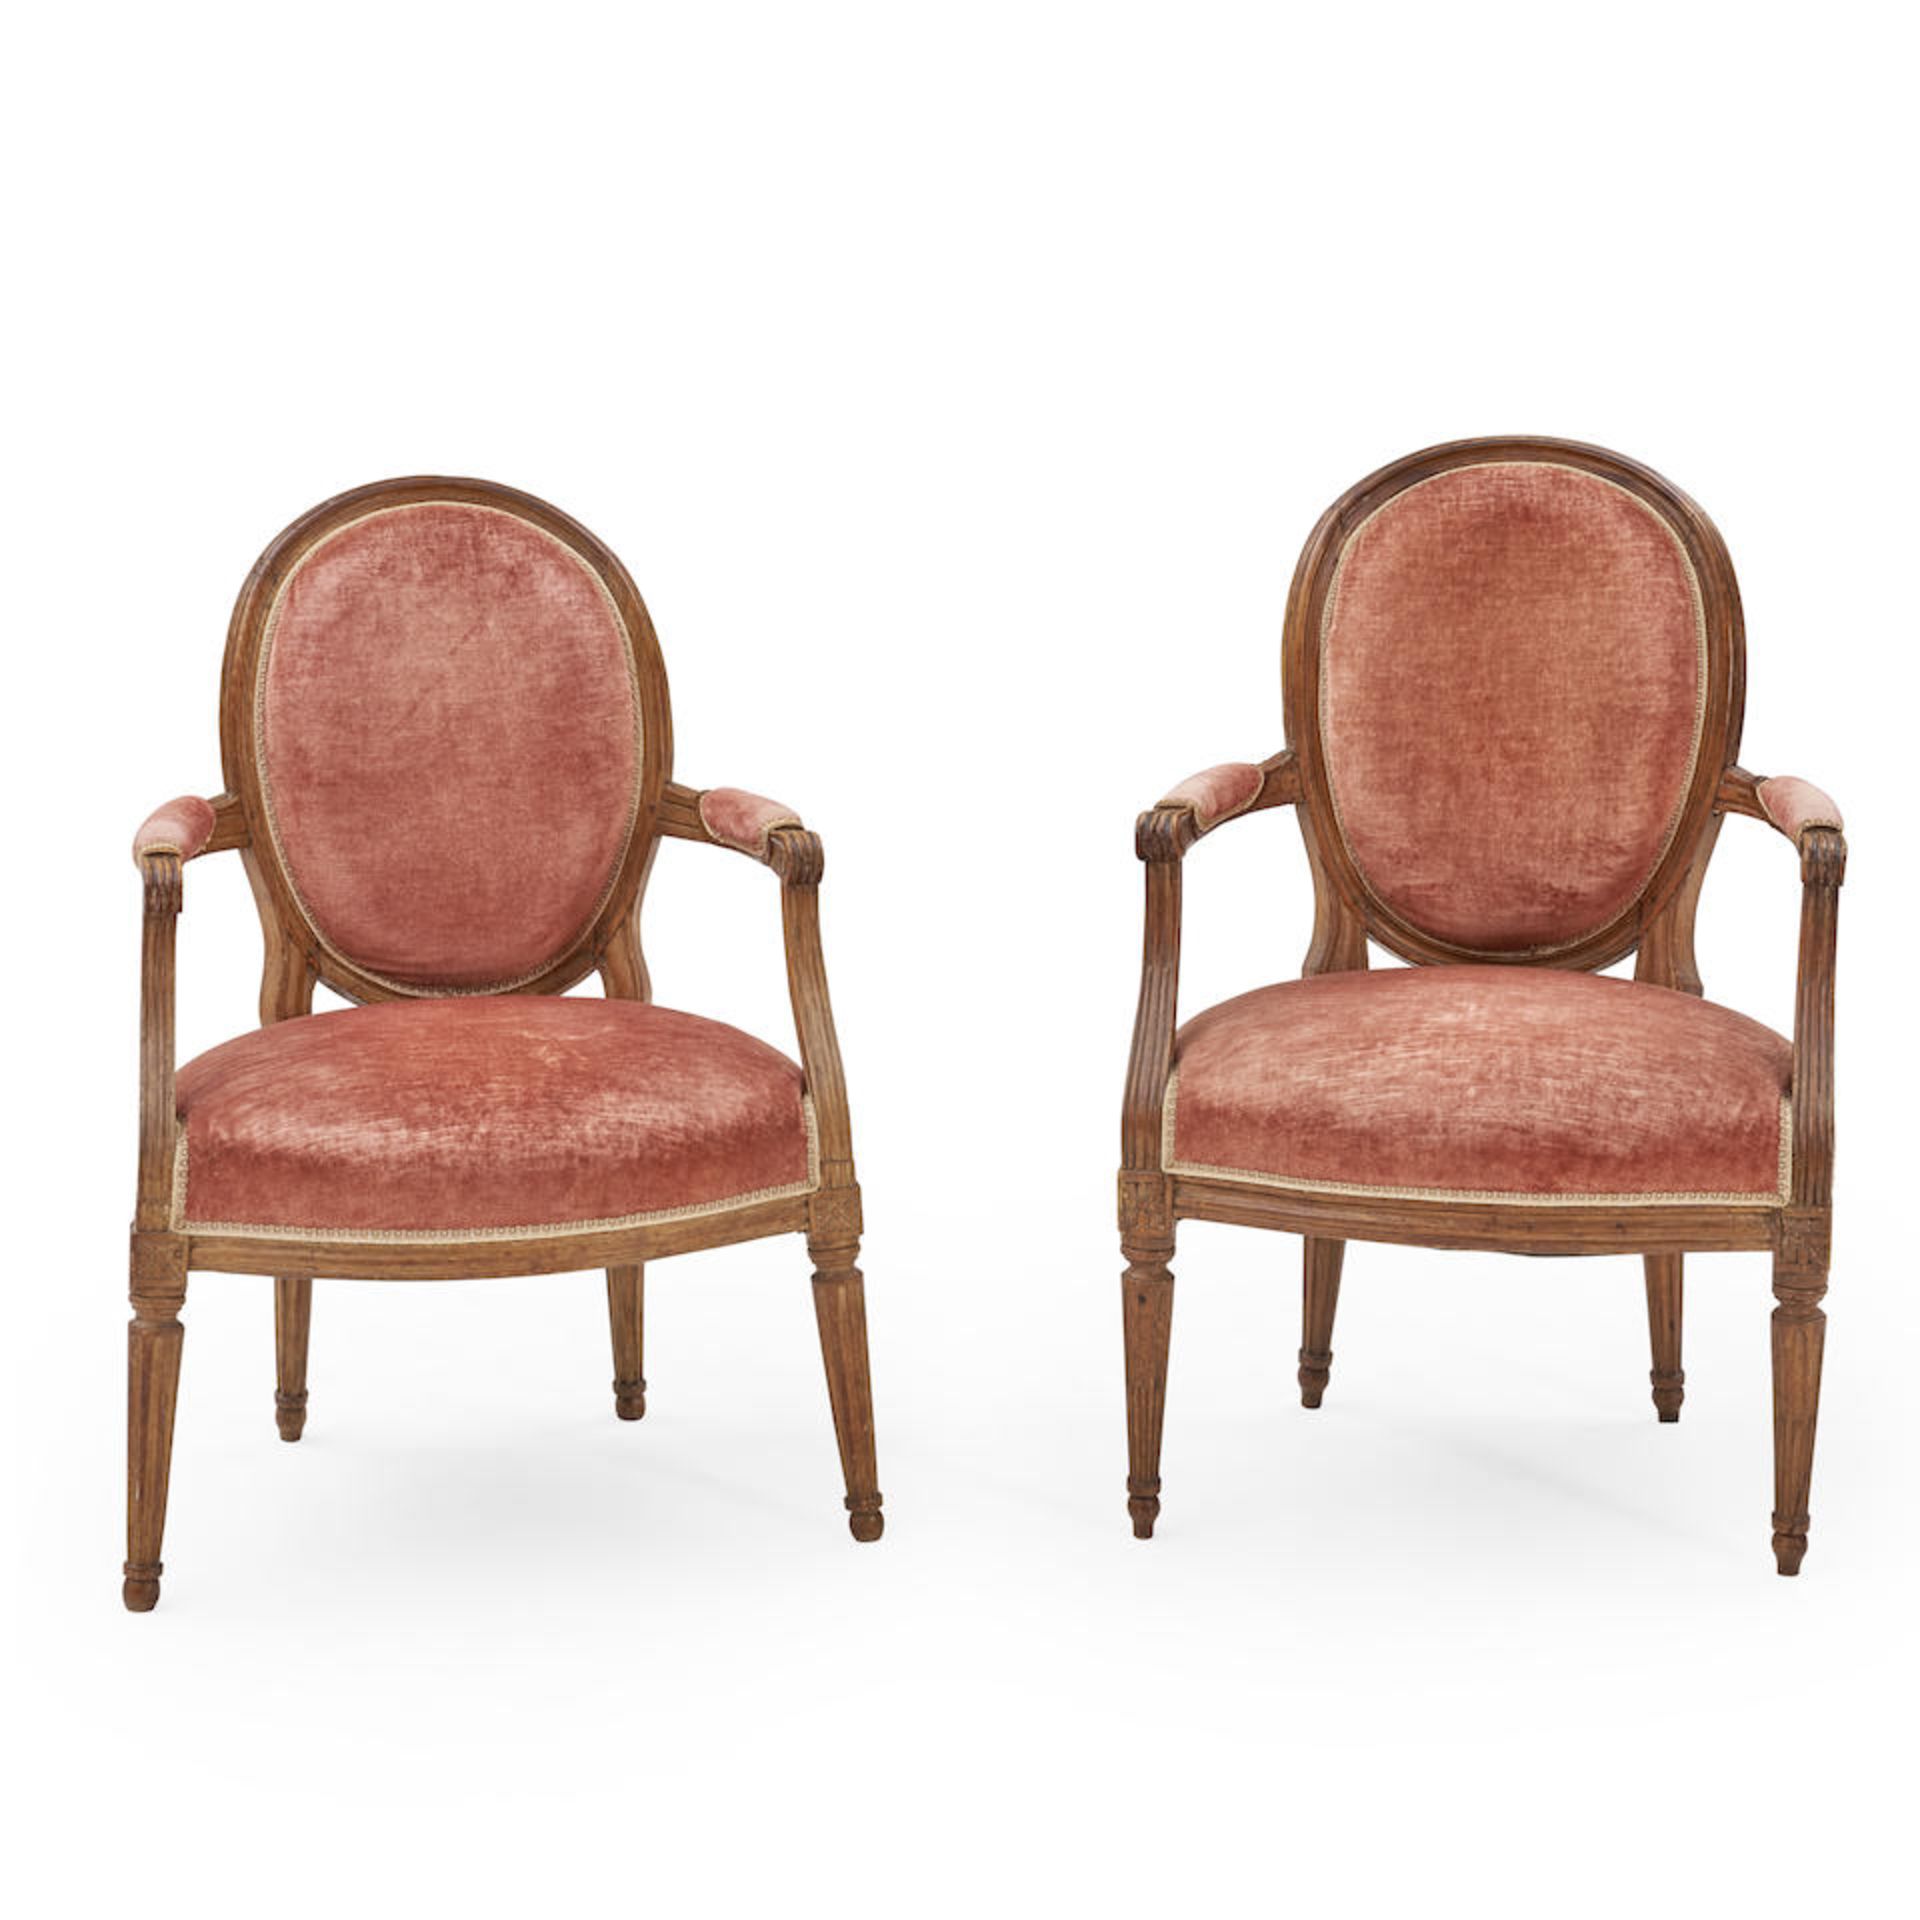 Pair of Louis XVI-style Beechwood and Upholstered Fauteuil, 19th century,